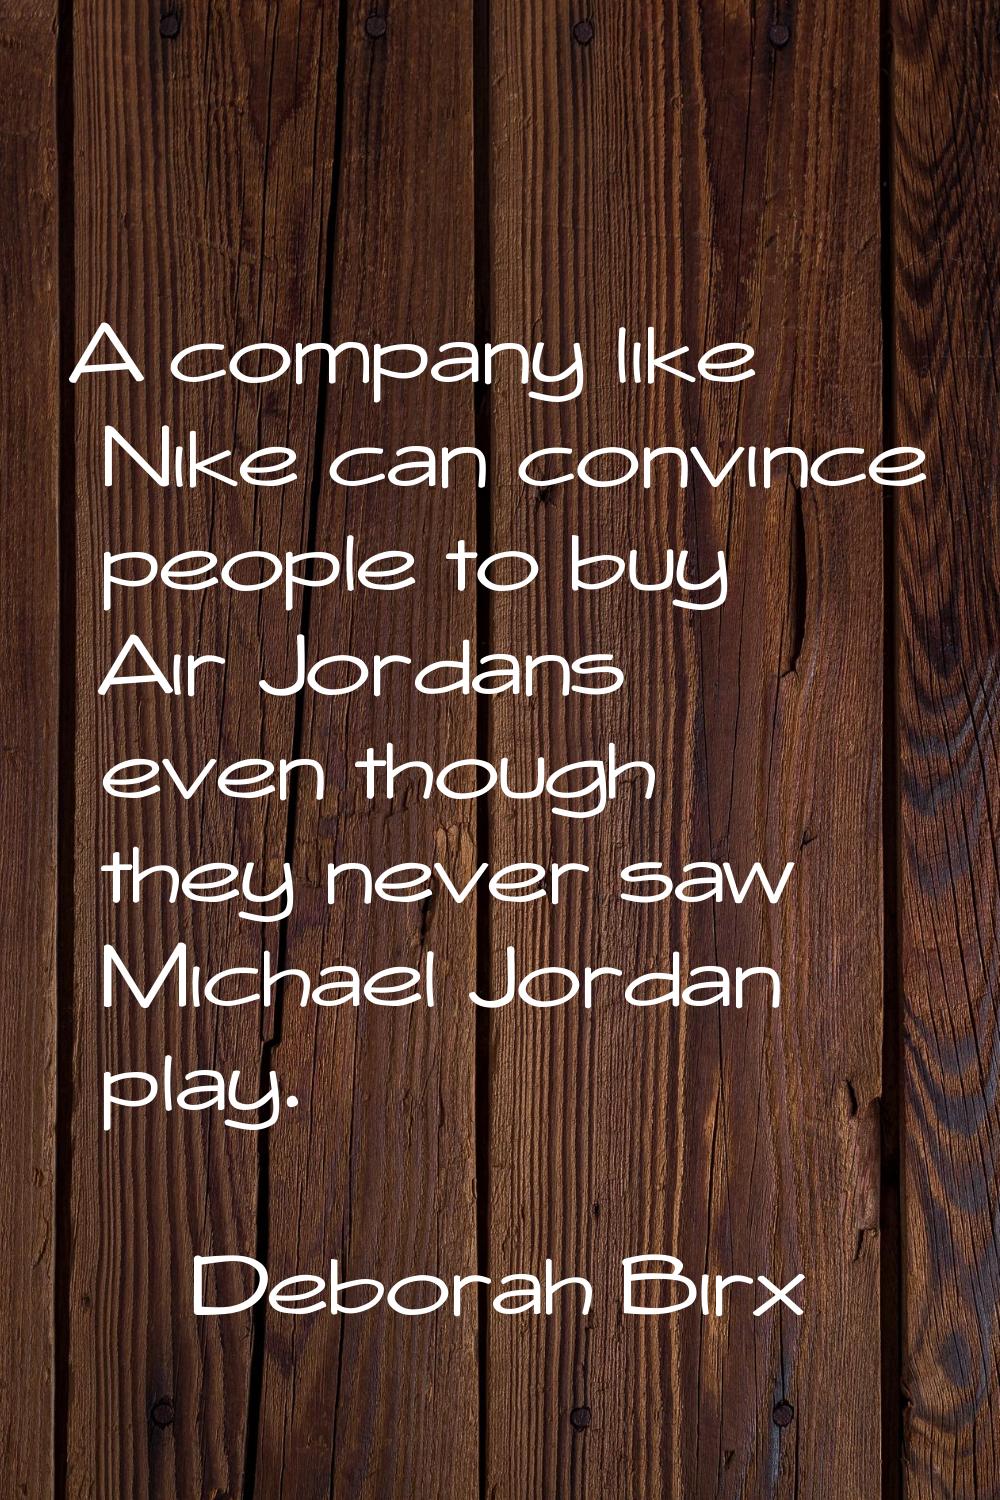 A company like Nike can convince people to buy Air Jordans even though they never saw Michael Jorda